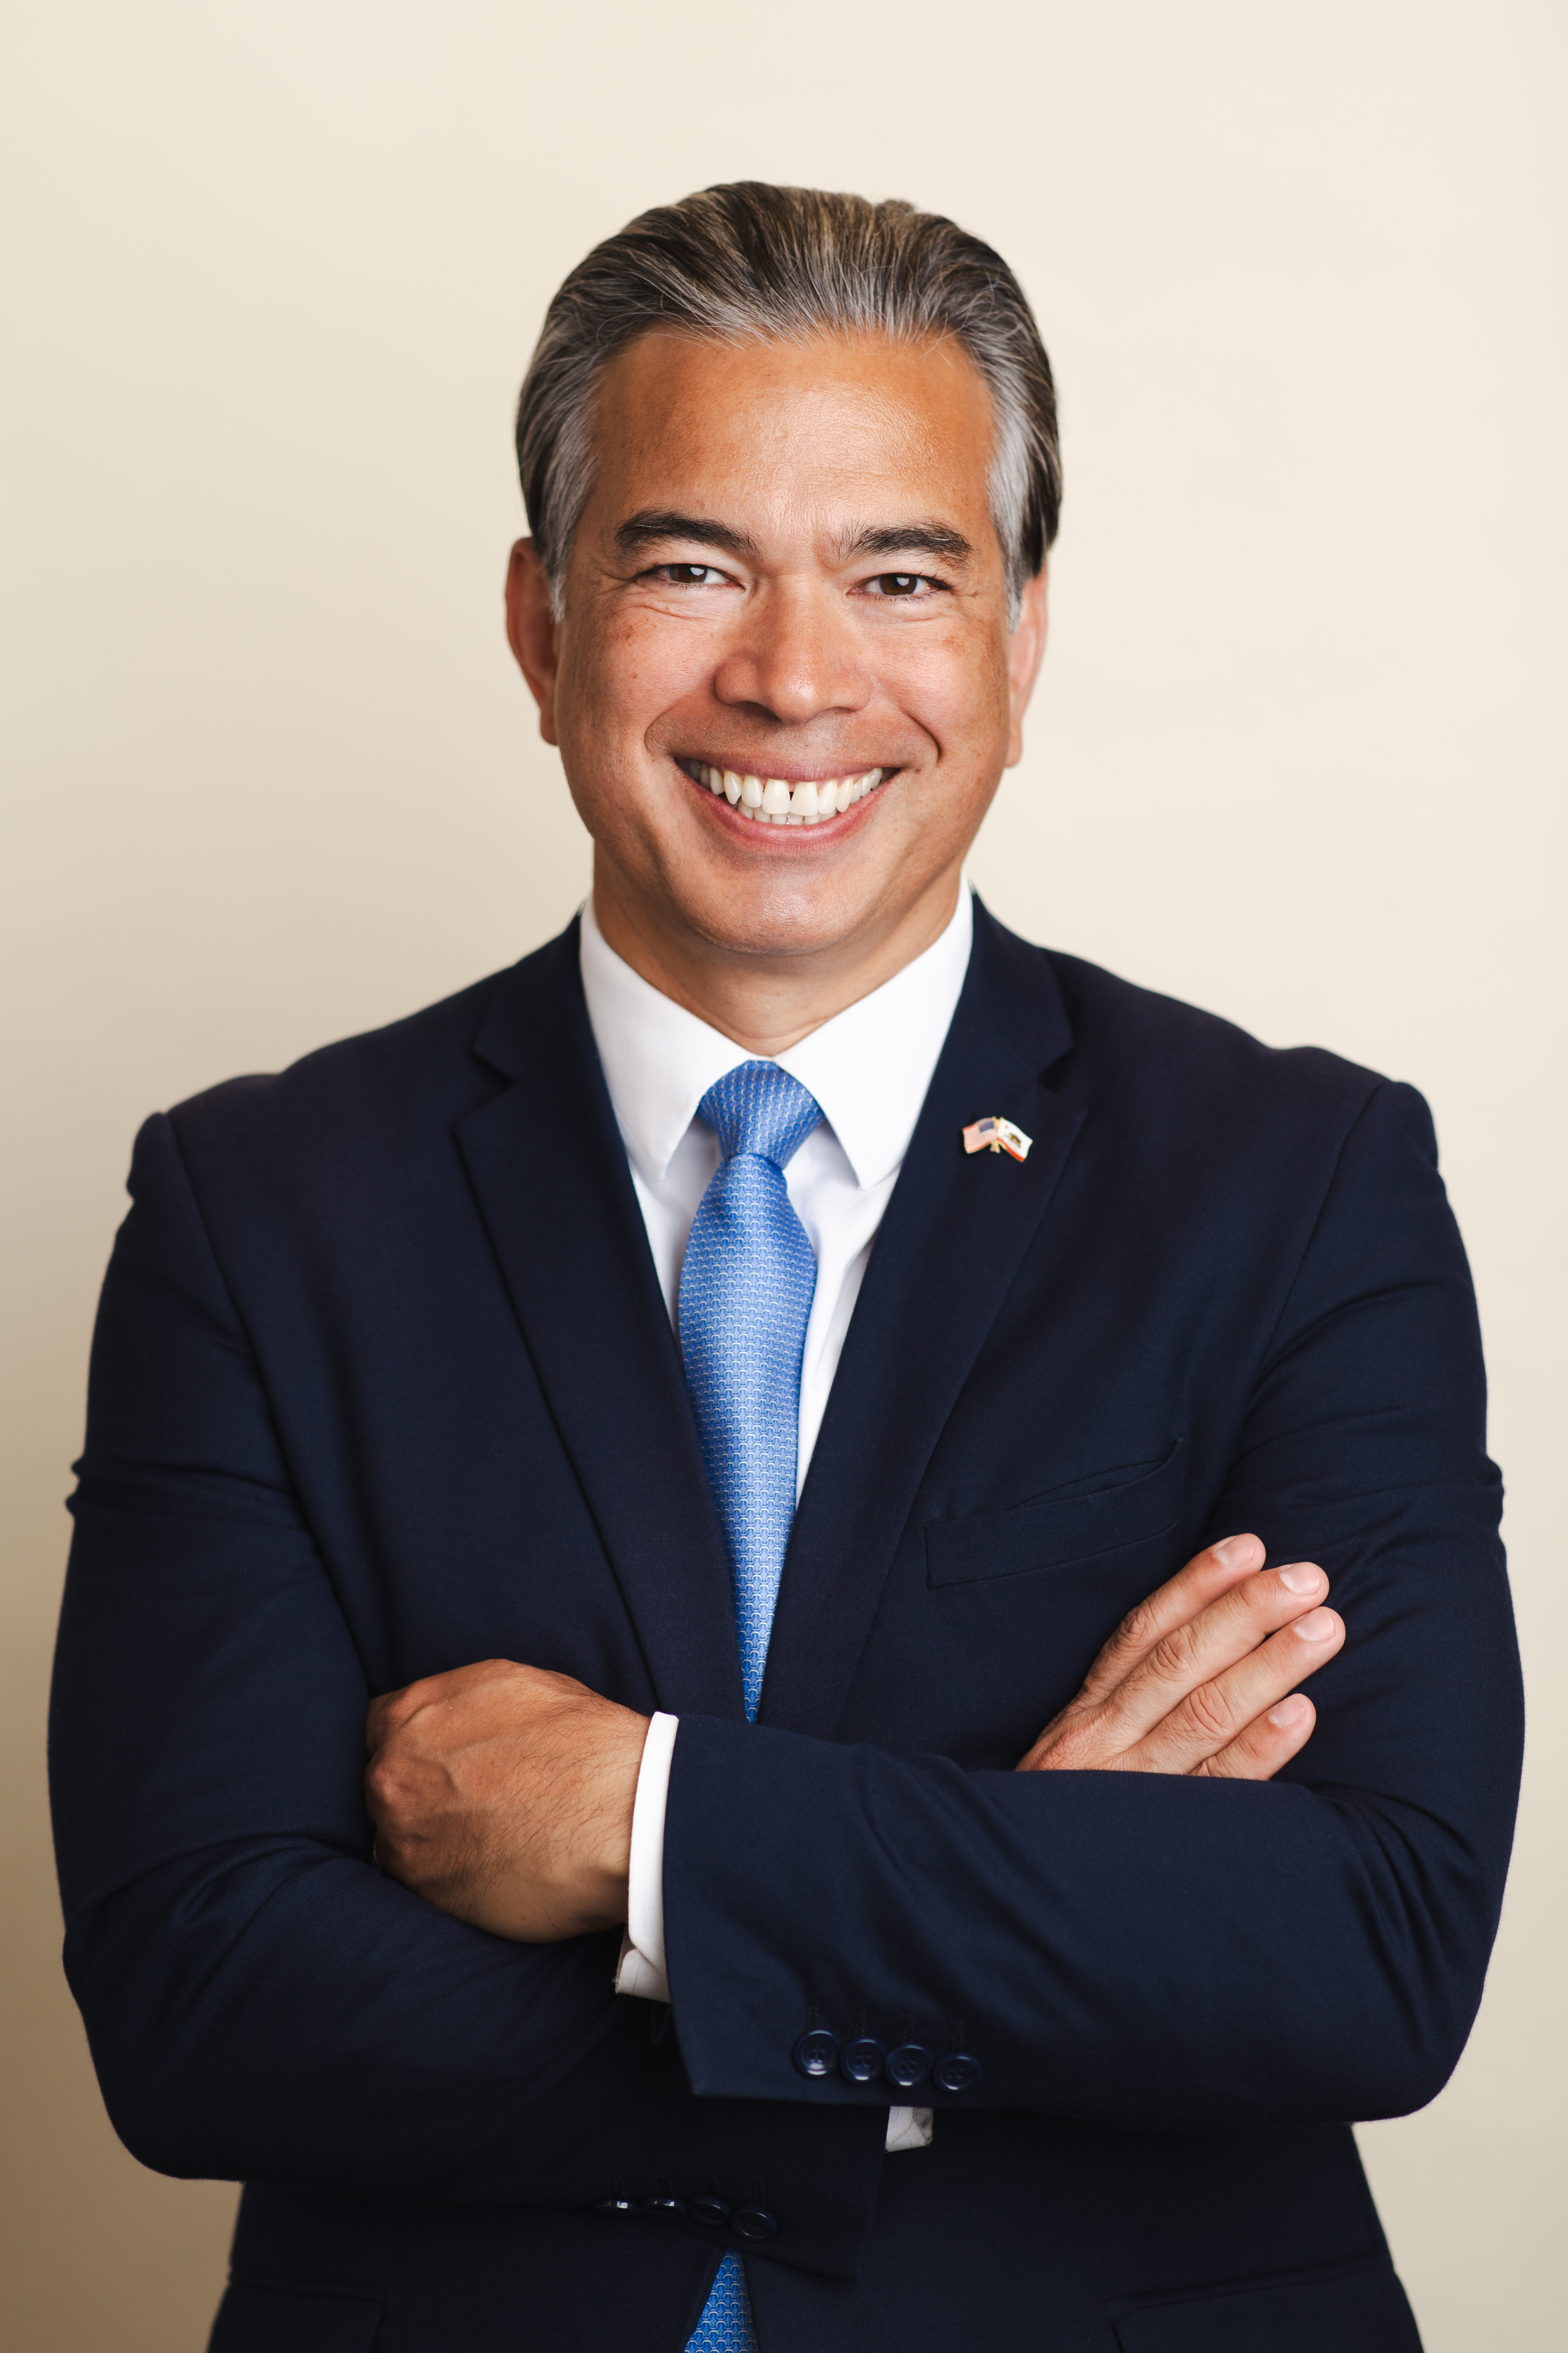 About Attorney General Rob Bonta